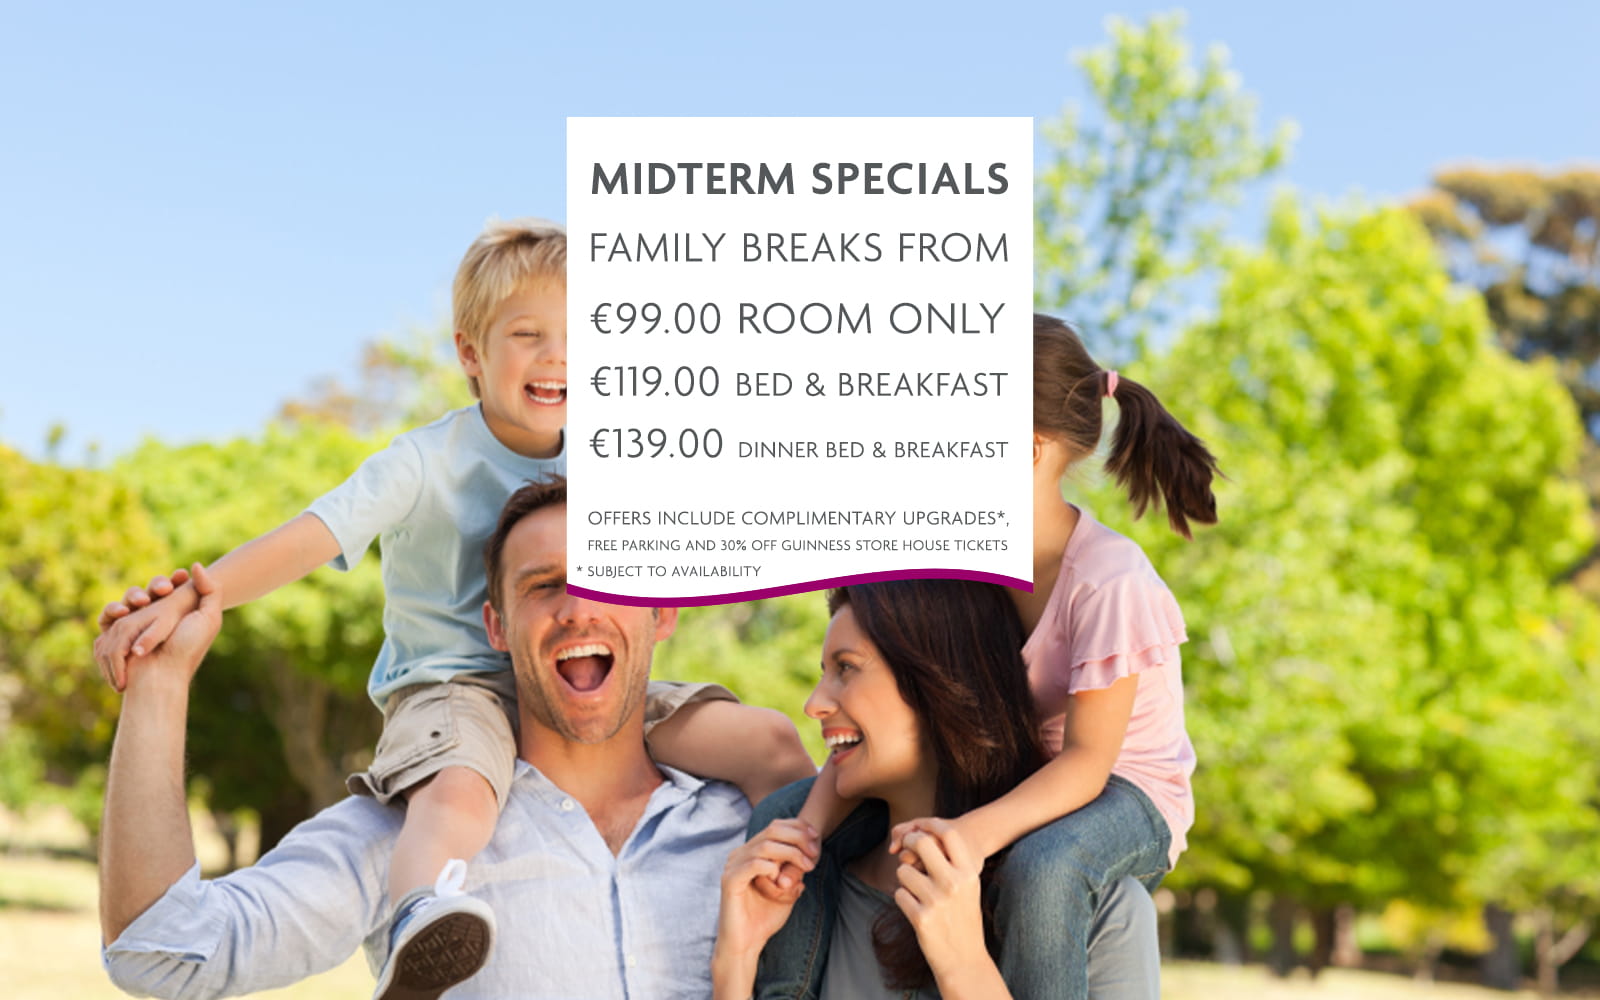 Crowne Plaza Midterm Specials banner with happy family